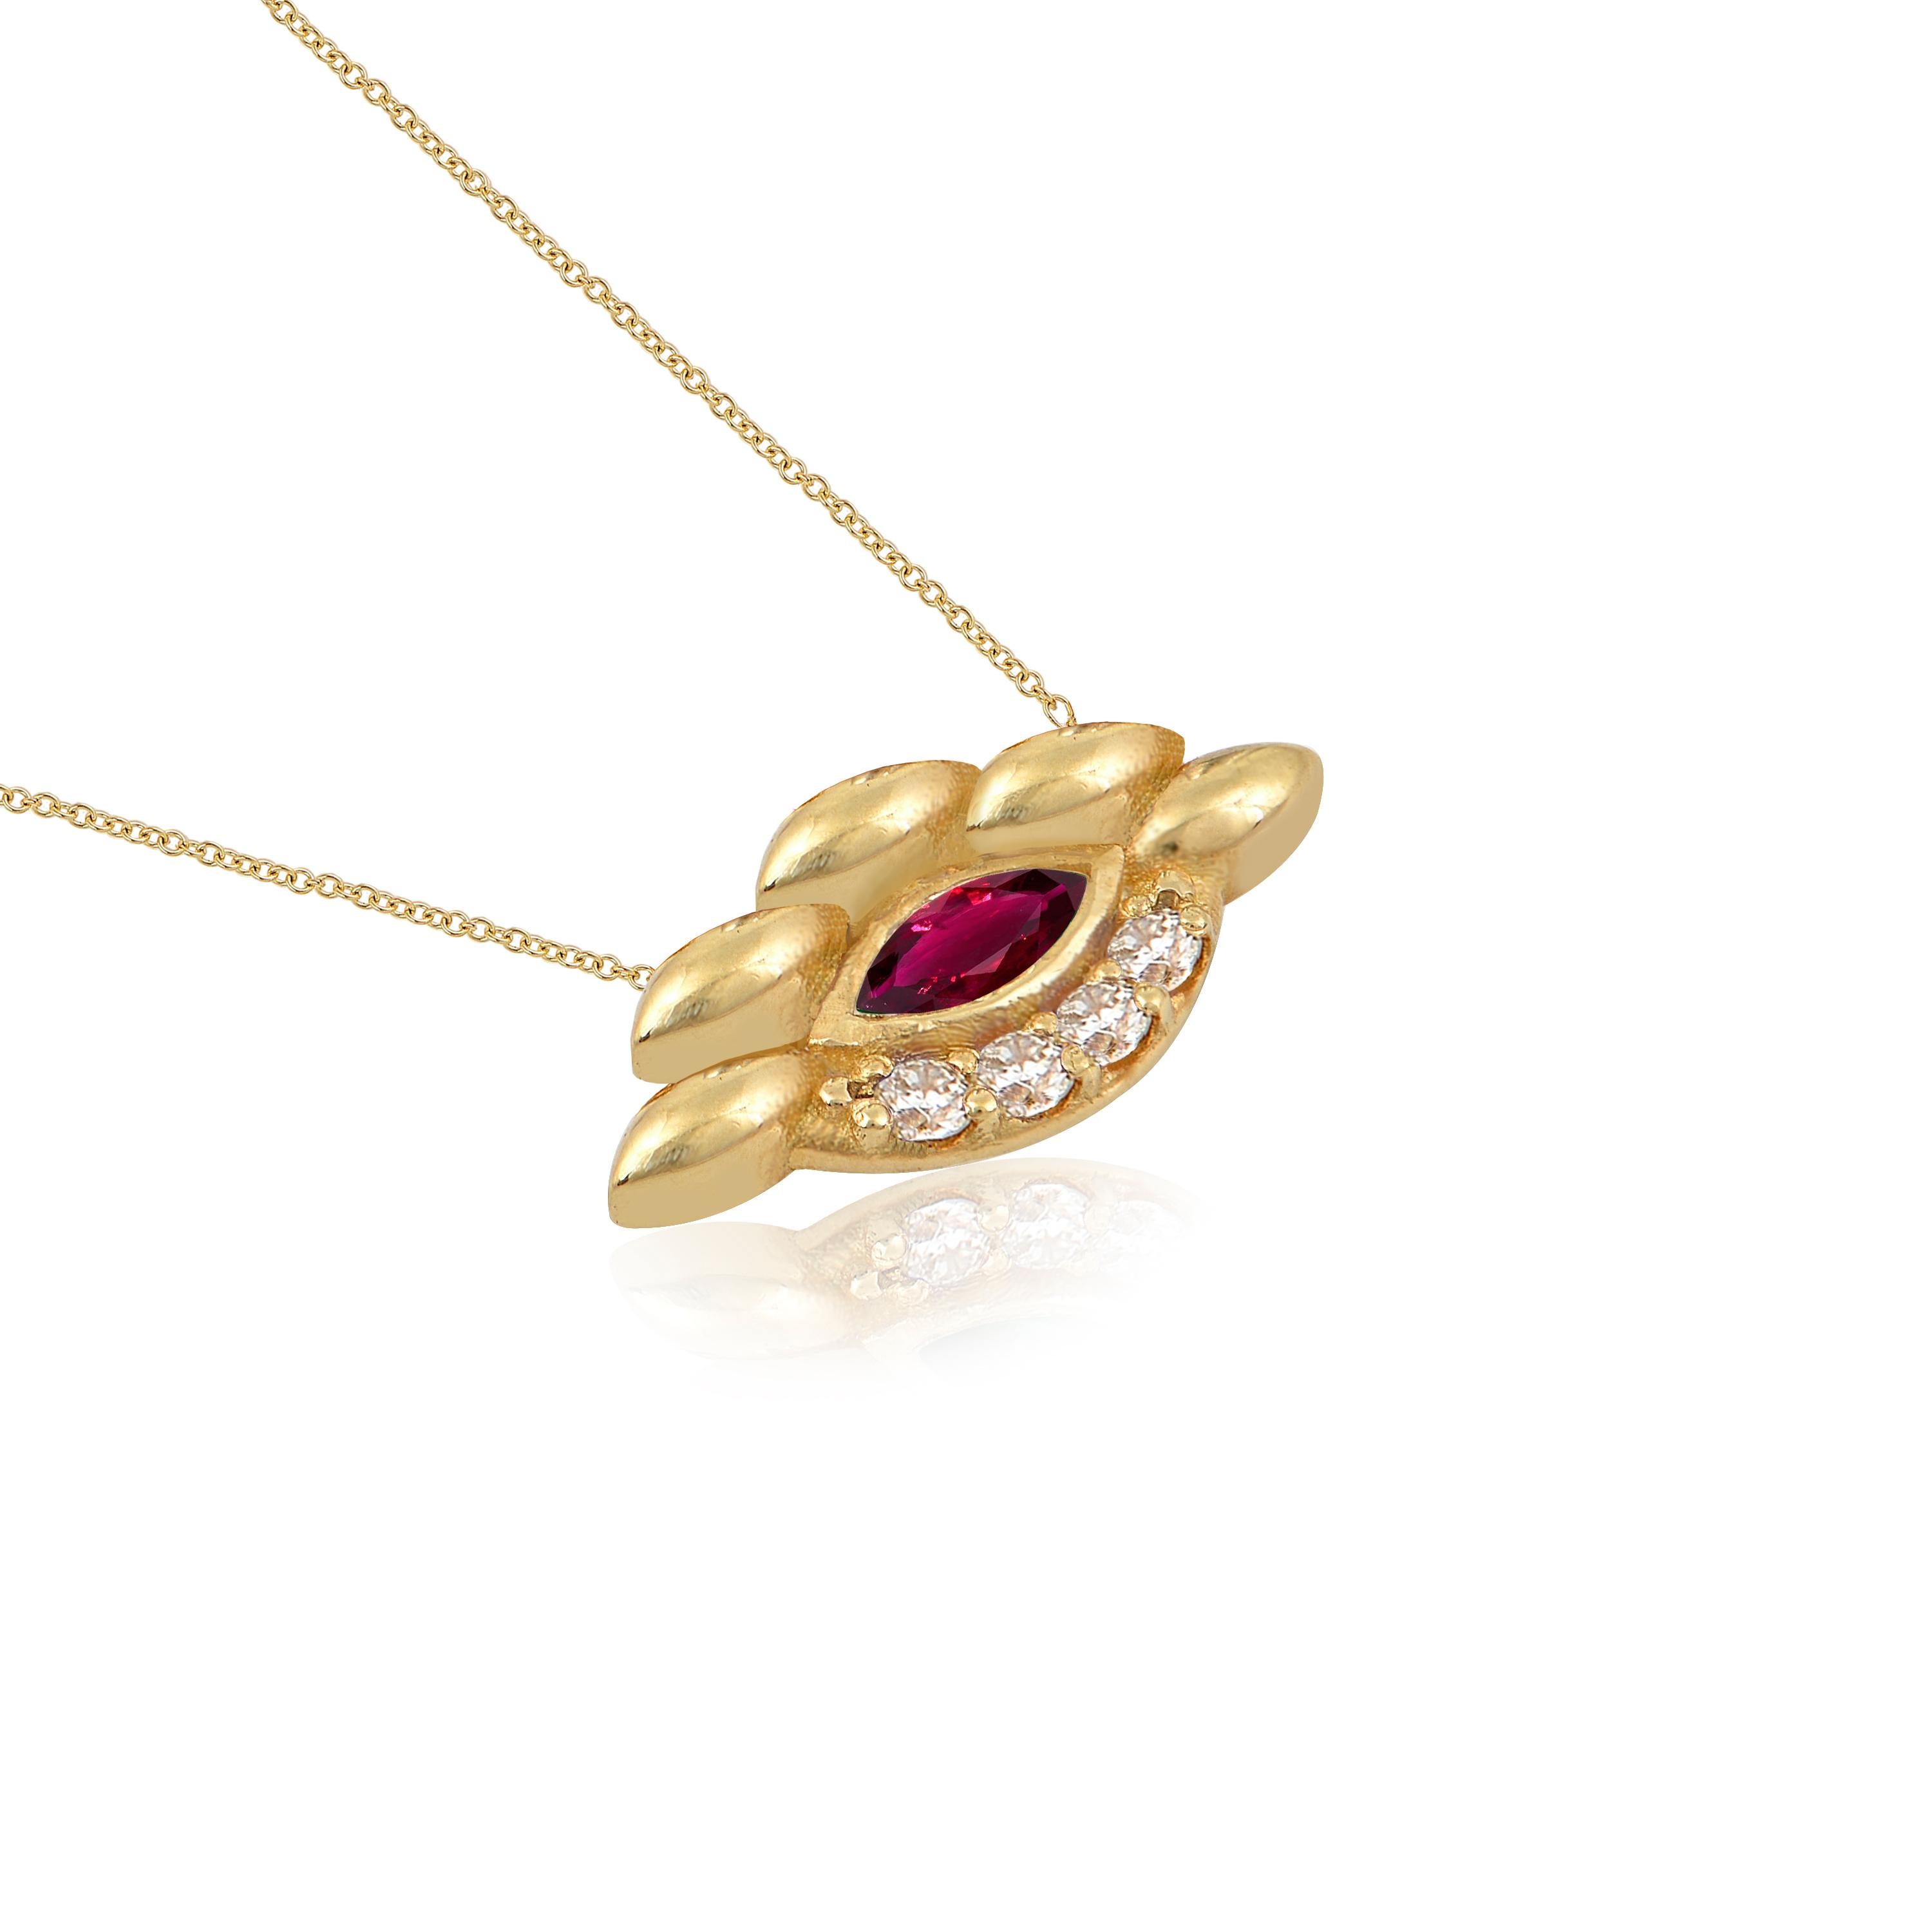 Designer: Alexia Gryllaki

Dimensions: motif 18x9mm, chain 450mm
Weight: approximately 3.8g (inc. chain) 
Barcode: NEX7008SS


Eye pendant in 18 karat yellow gold with a 400mm chain, set with a marquise ruby approx. 0.30cts and round brilliant-cut